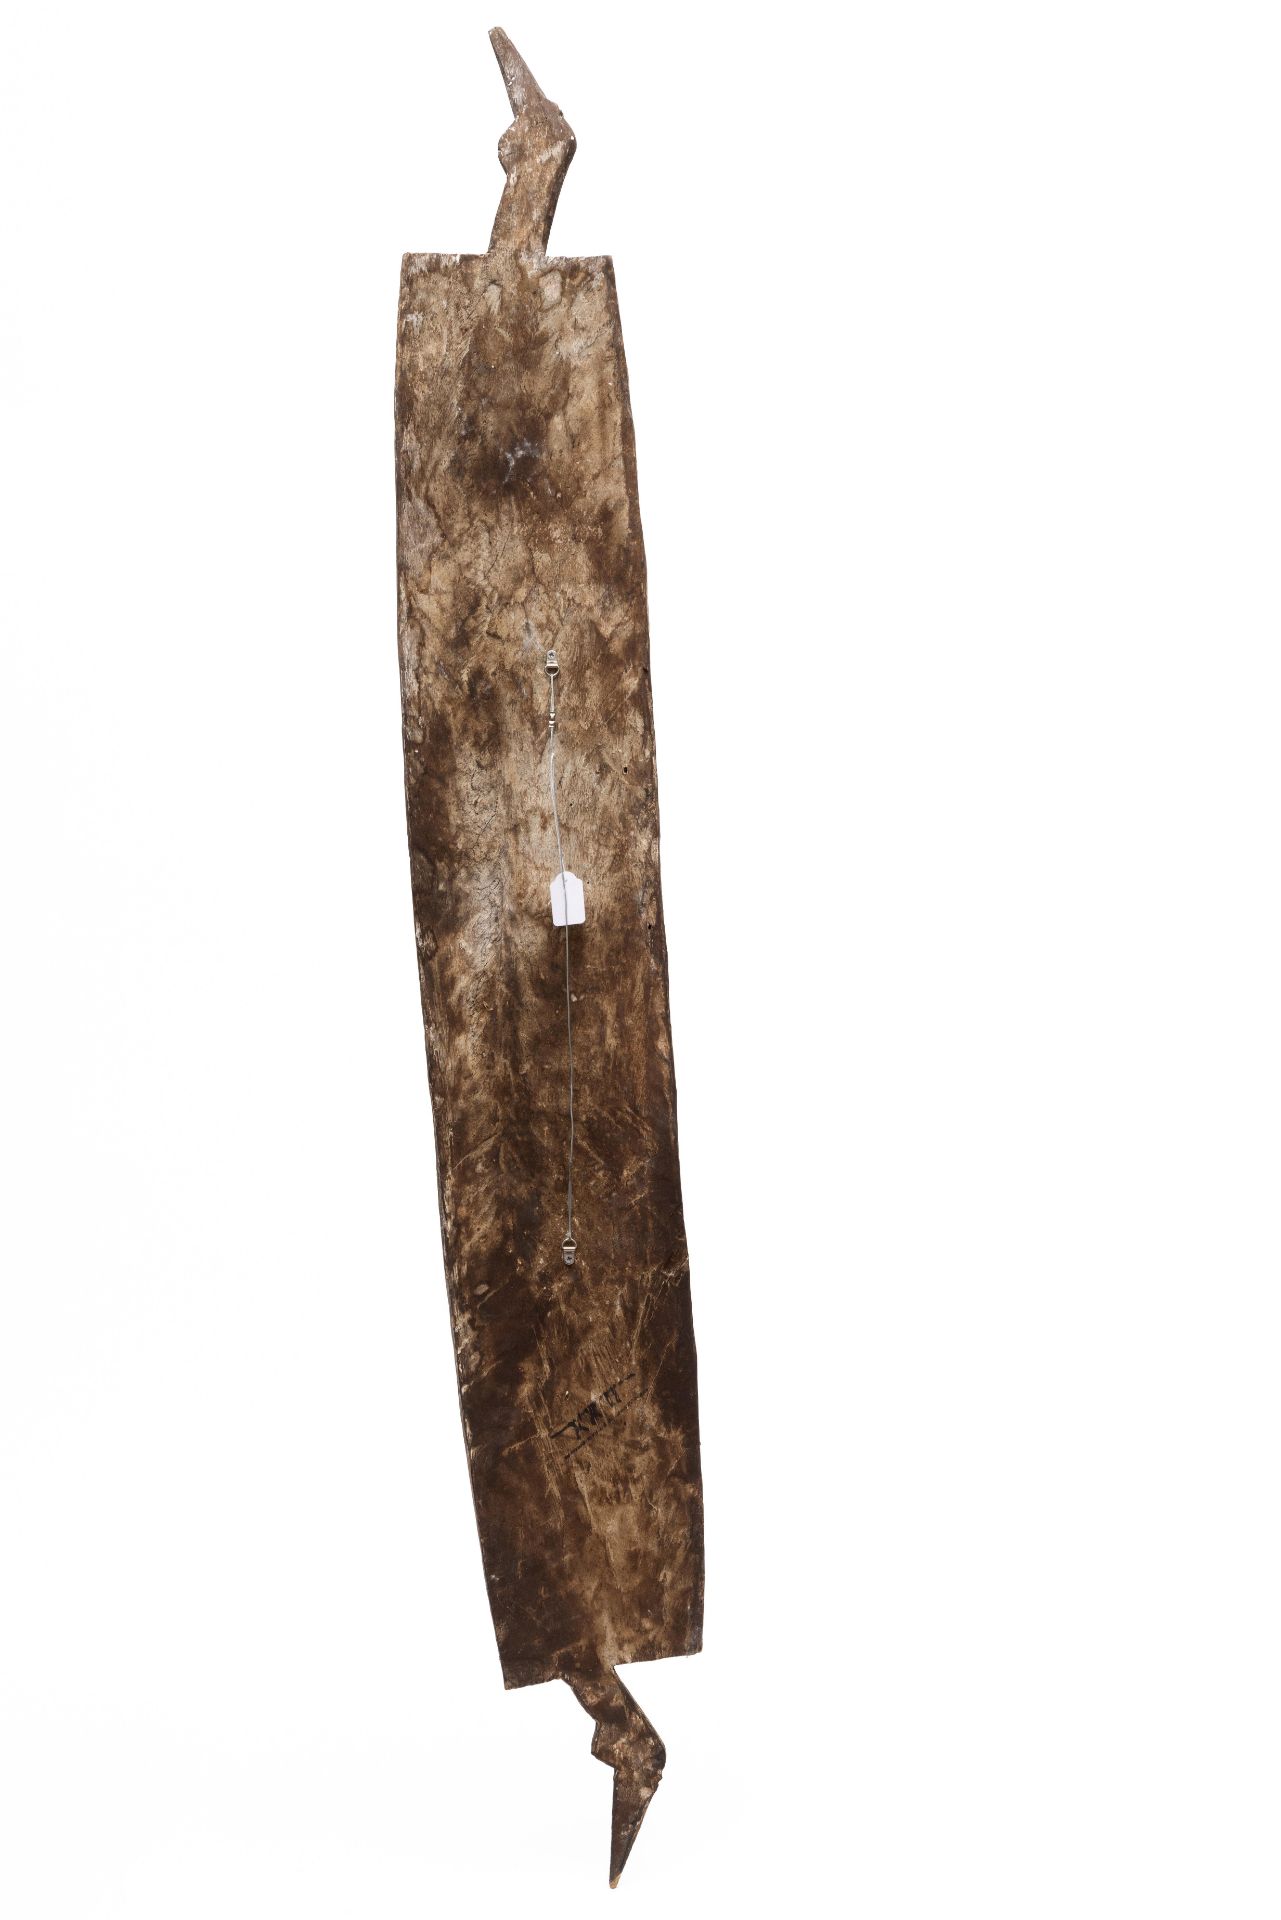 Papua, Kamoro, a carved ceremonial plank, yamate - Image 2 of 2